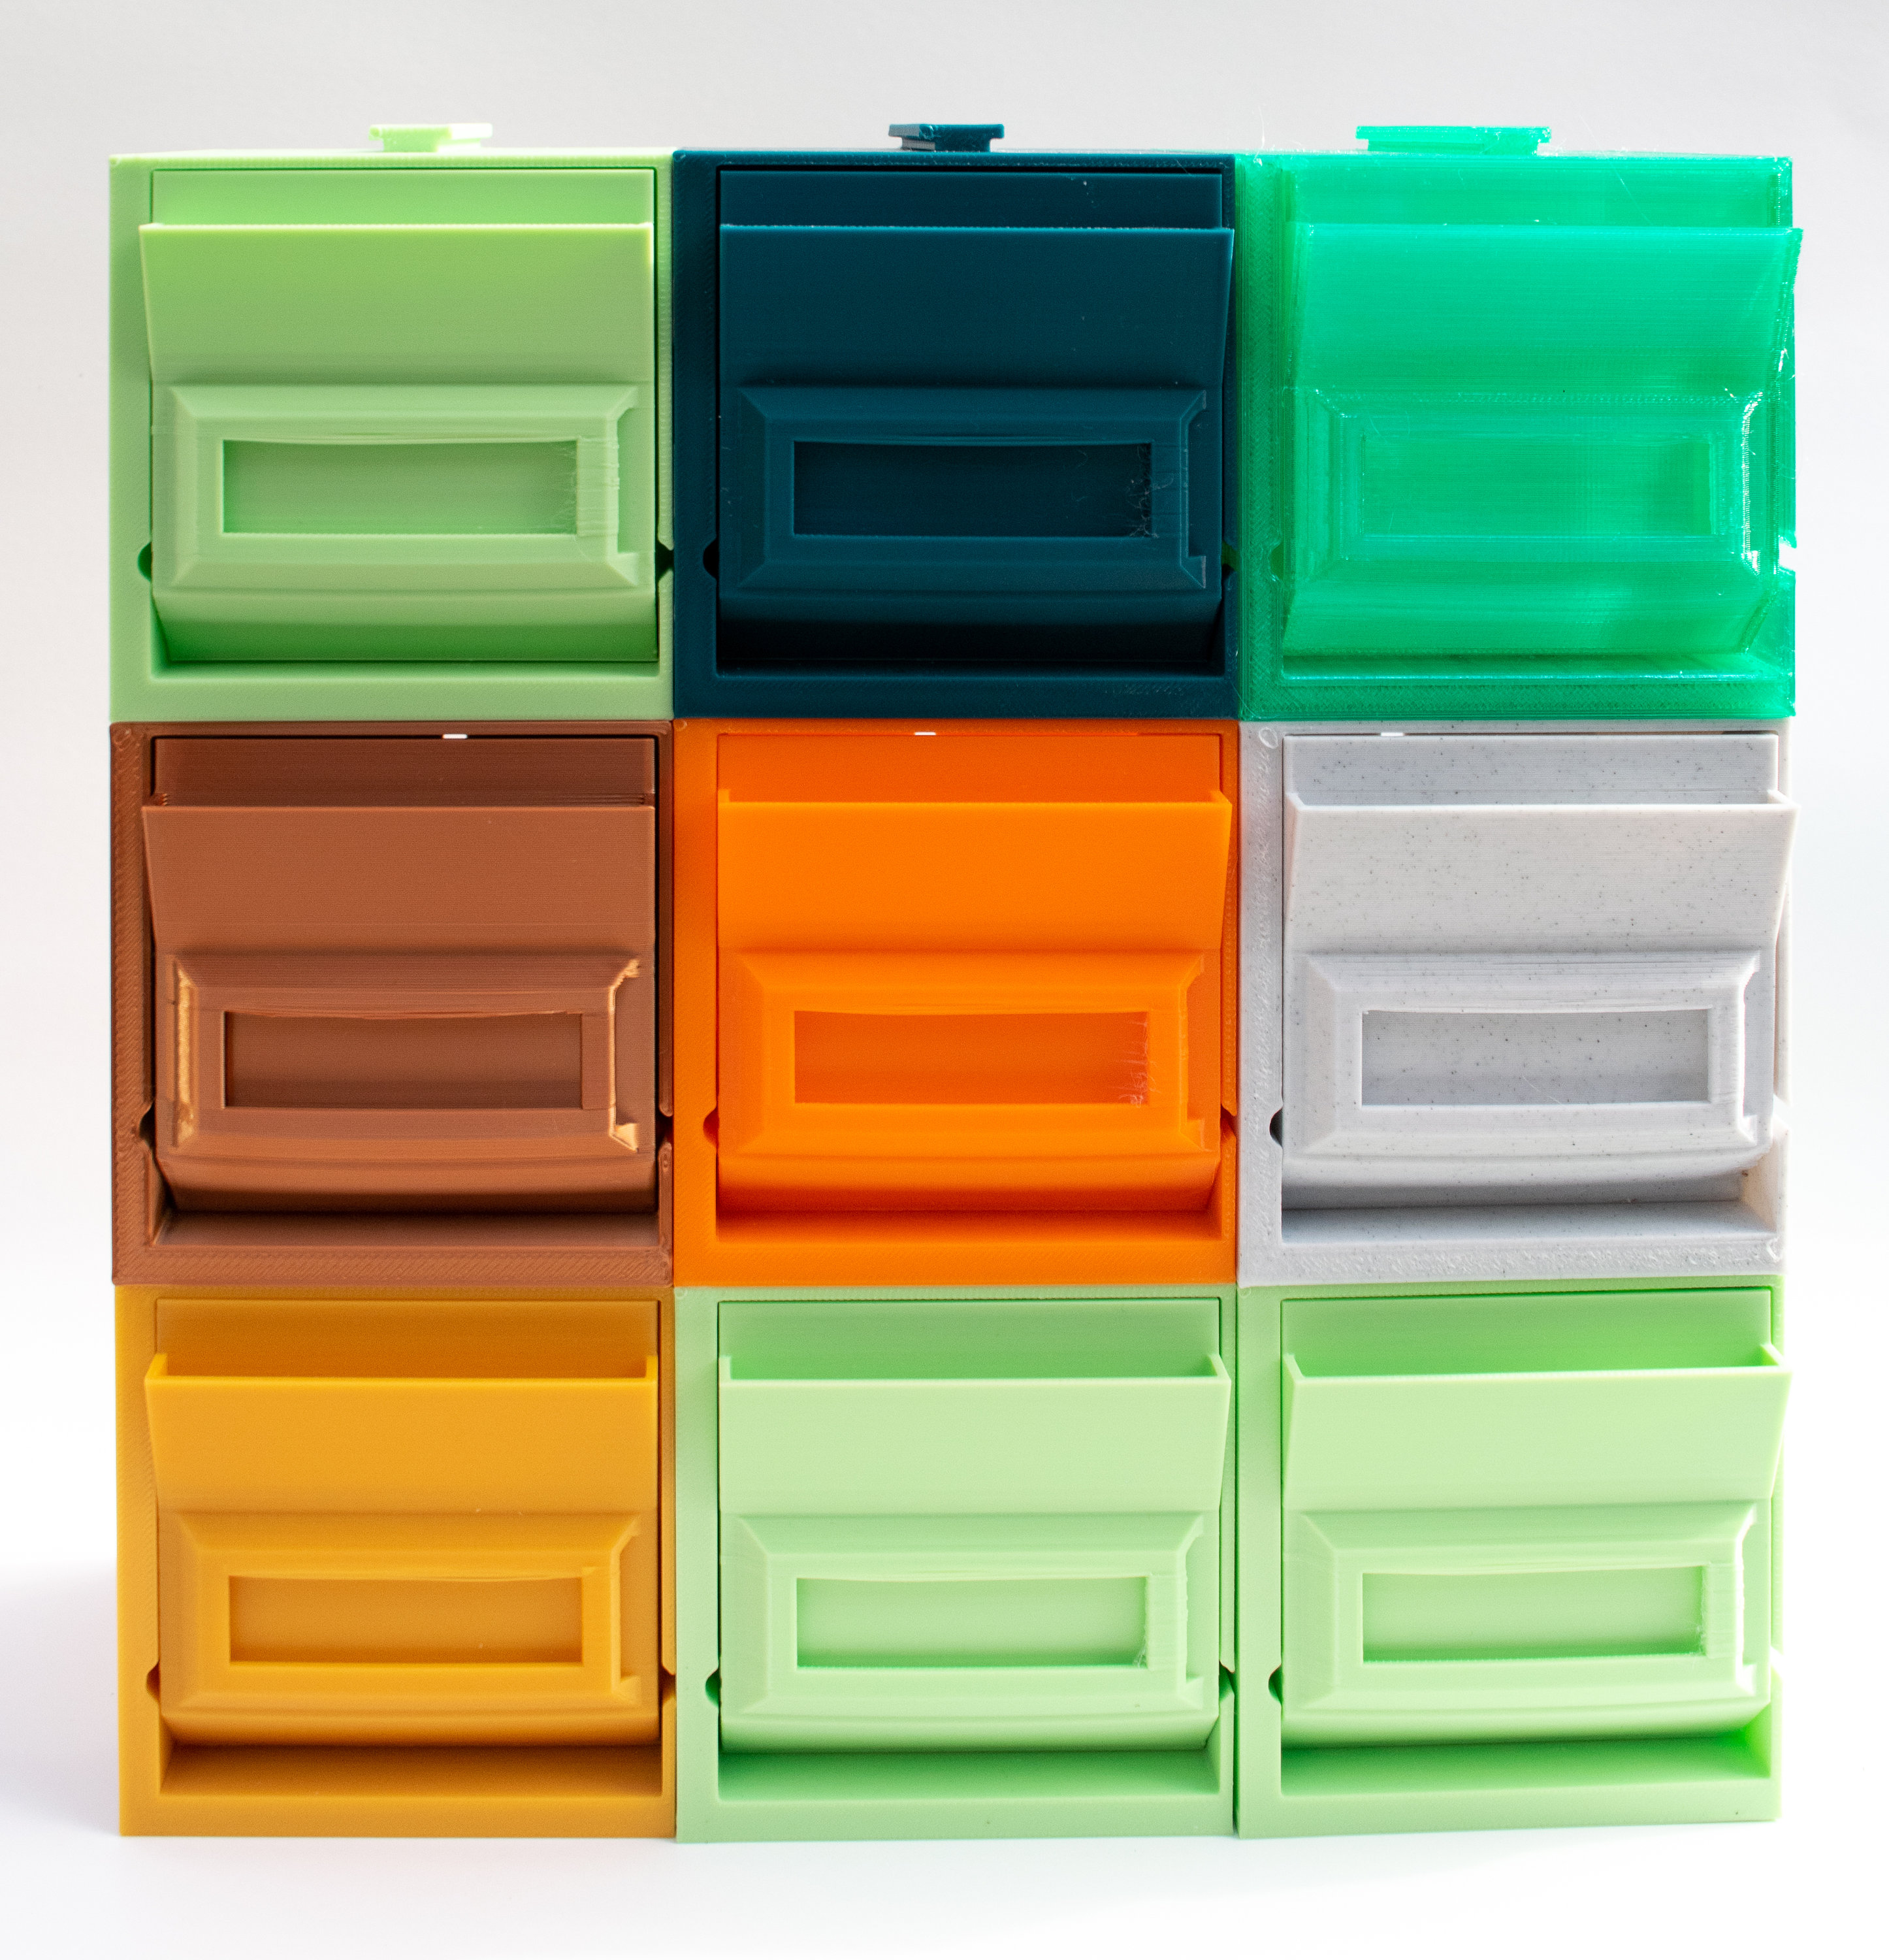 One Piece Clear Plastic Box, Storage Containers Storage Box With Snap-tight  Closure Latch for Pencils, Puzzles, Small Toys & Sewing Crafts. 